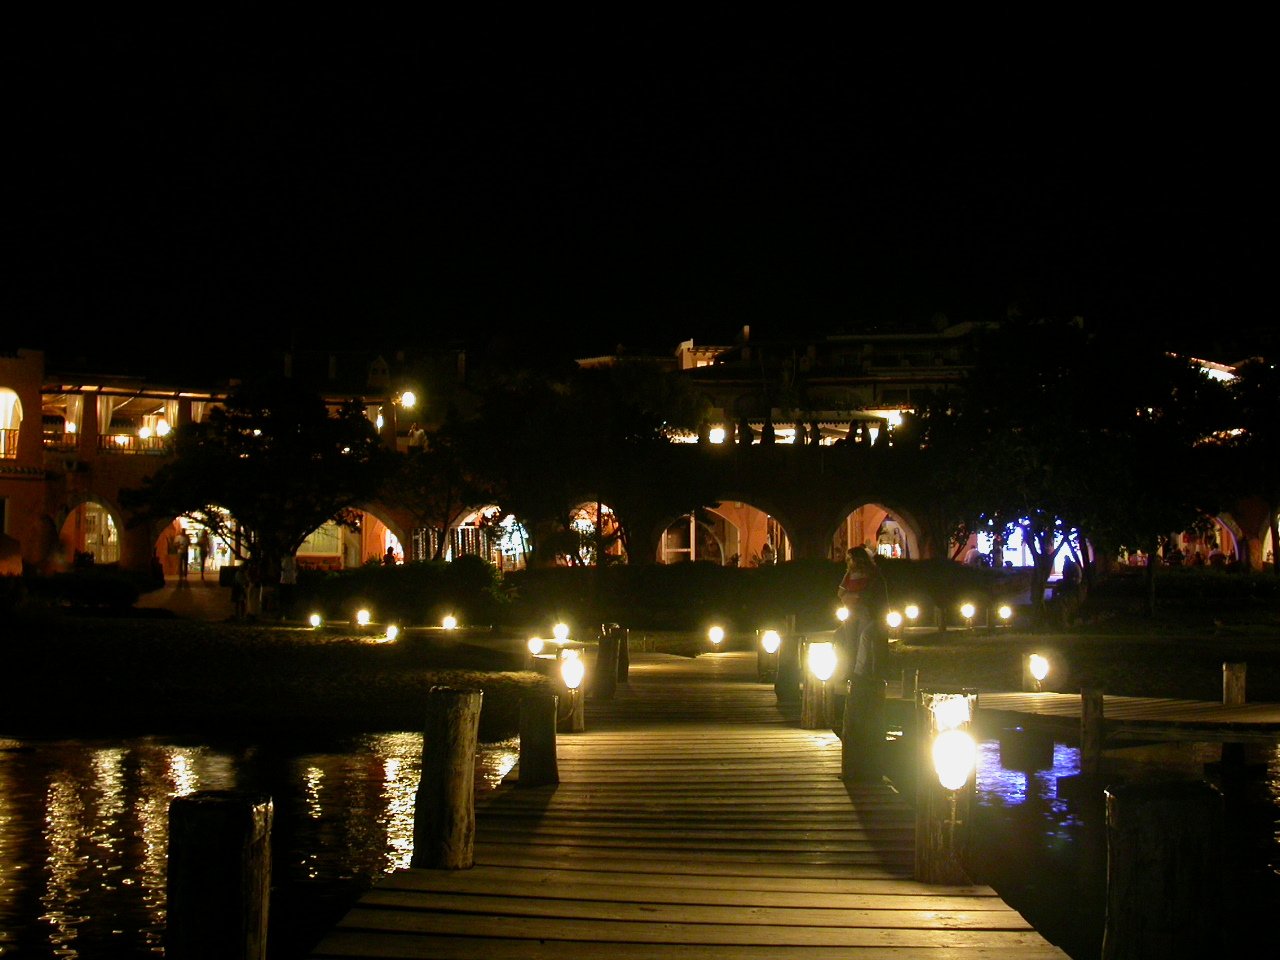 a lit walkway by a body of water with some lights